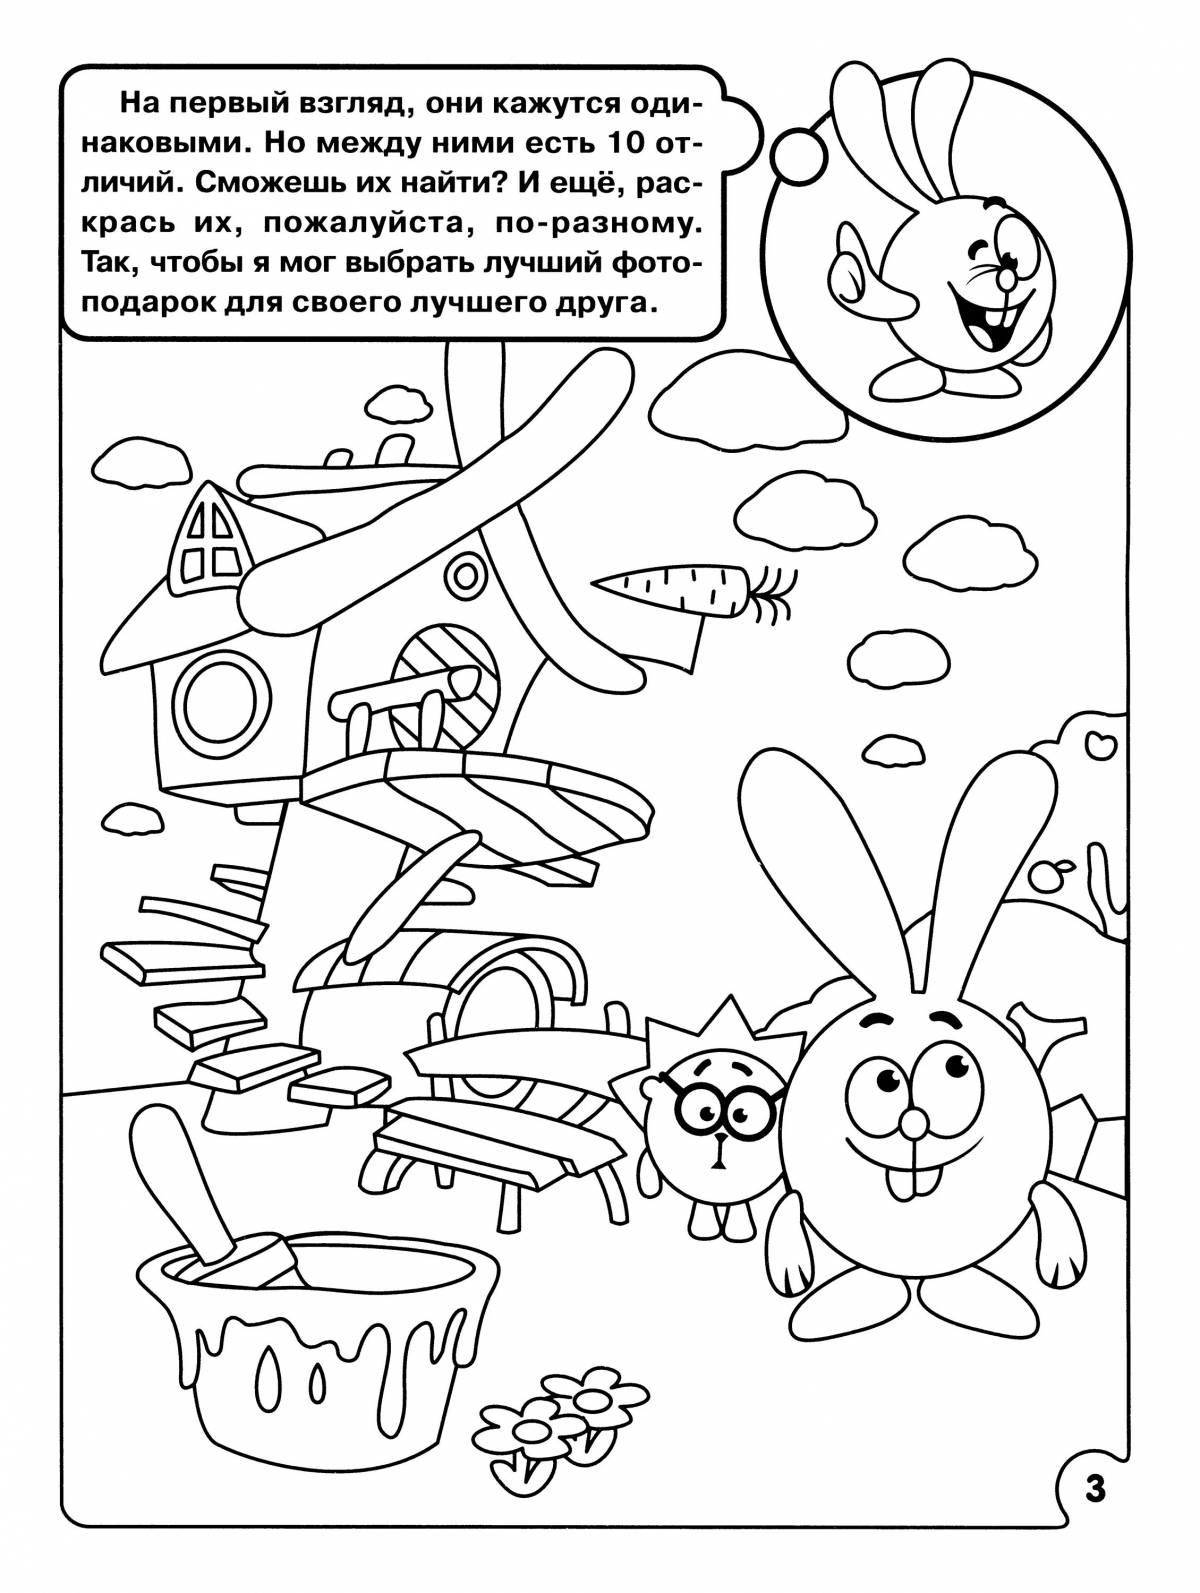 Creative smart smeshariki coloring pages